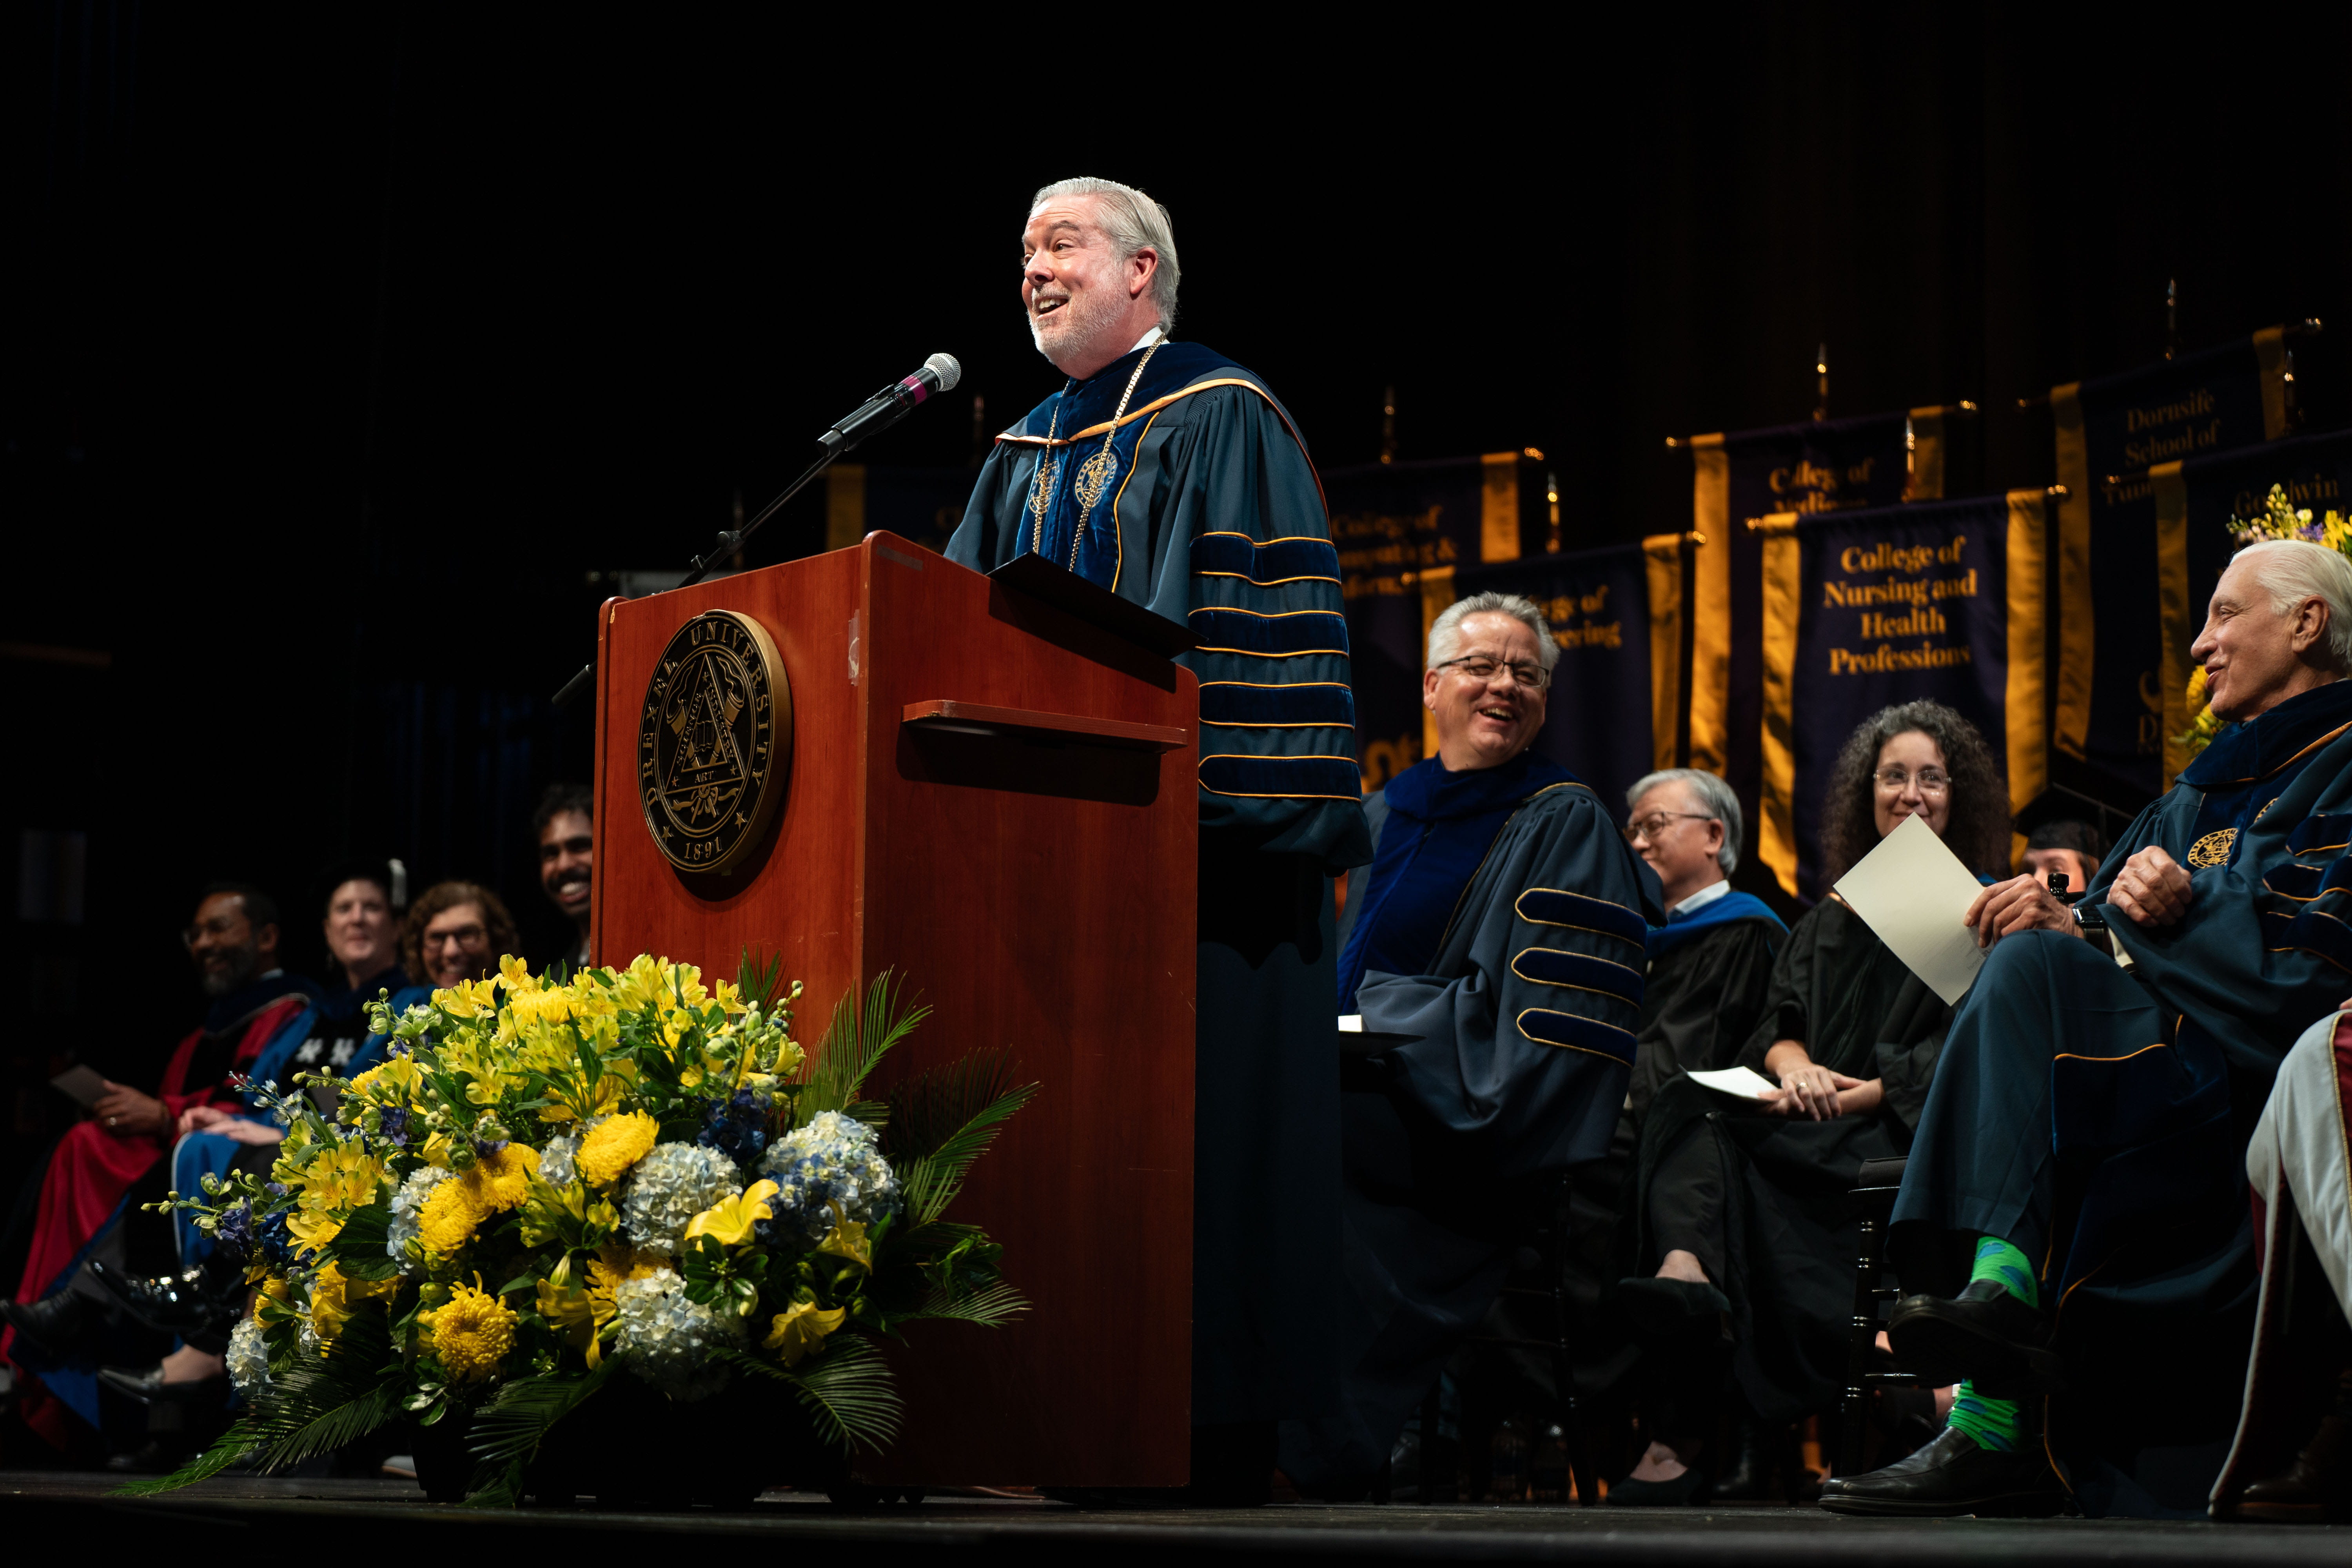 President John Fry giving speech at Convocation. Sitting behind him are various members of the Office of the Provost, including Paul E. Jensen, PhD.